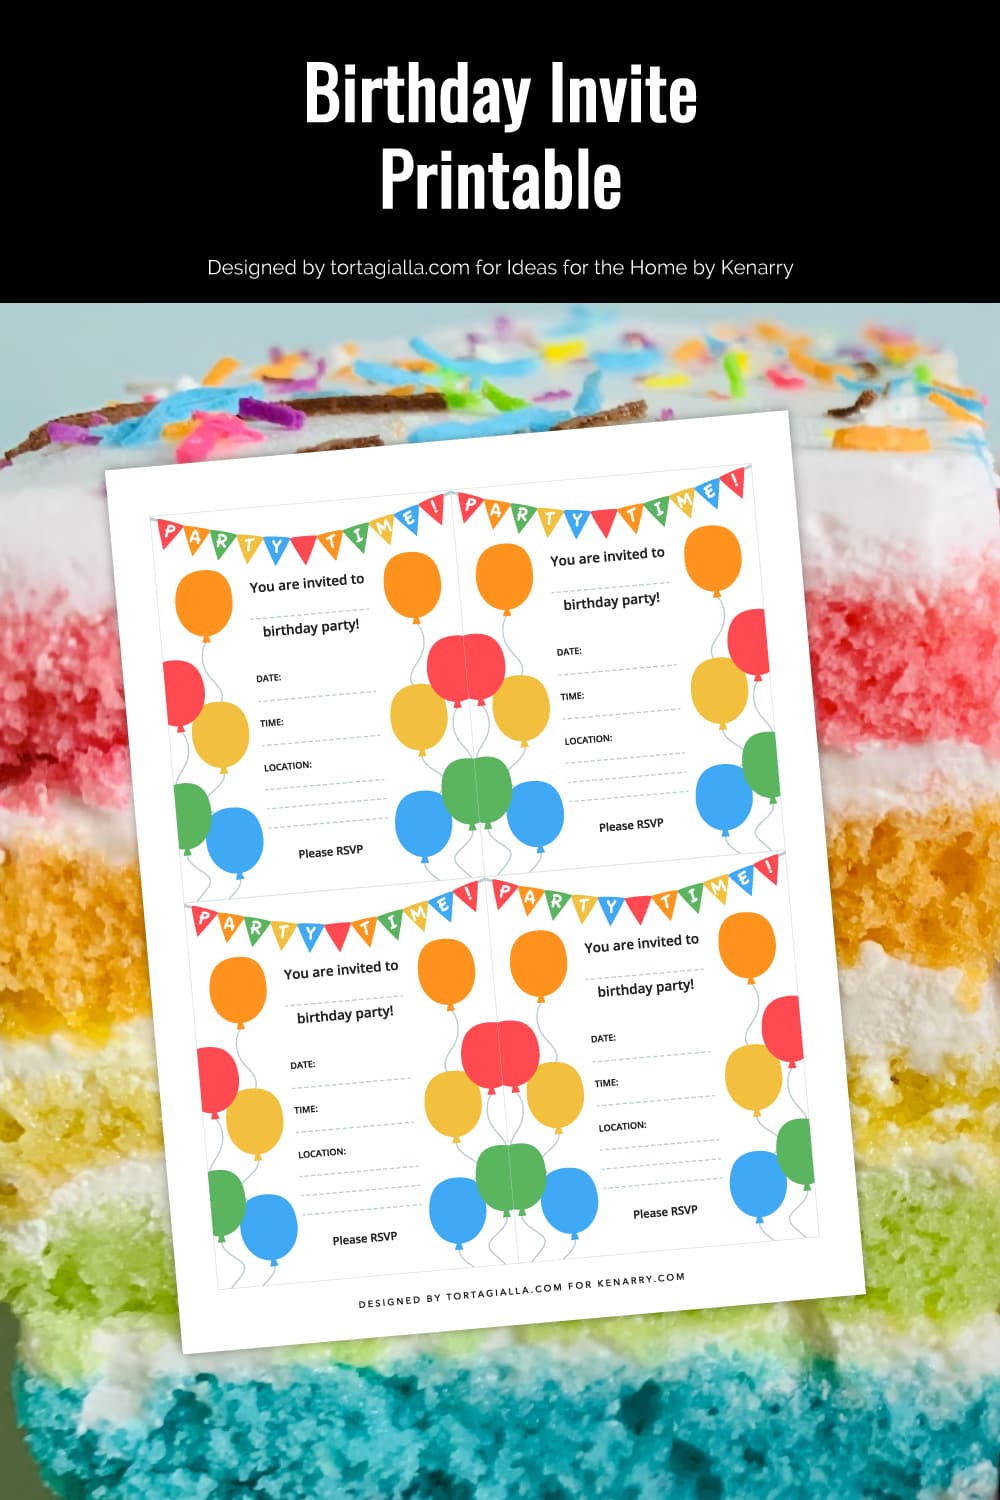 Preview of birthday party invite page on top of background with multi-layered rainbow cake slice in view. 